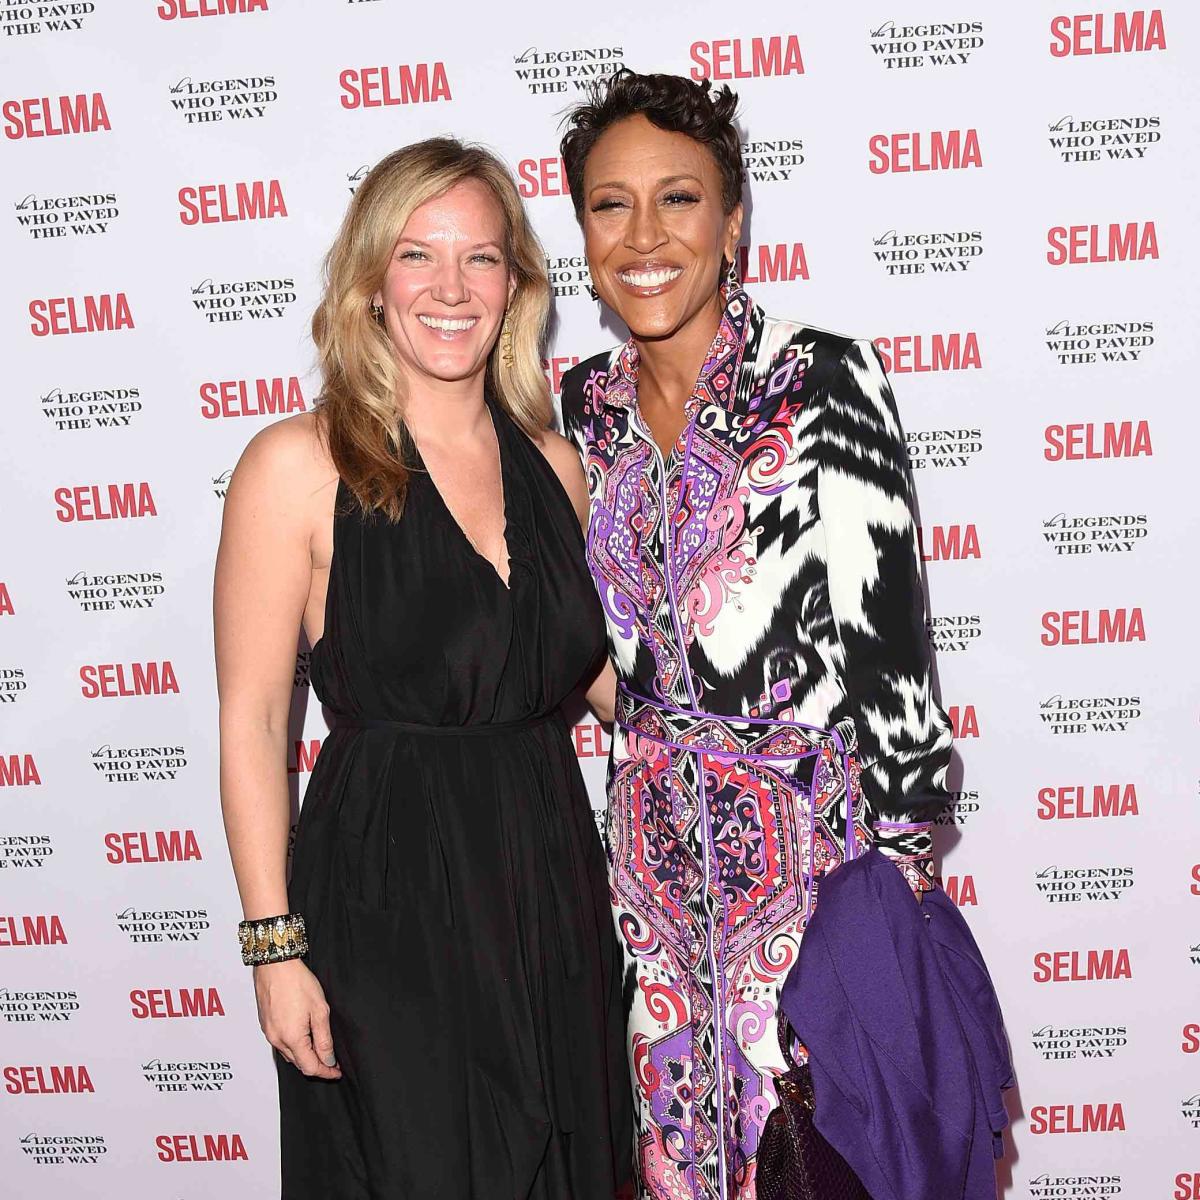 Robin Roberts Shares An Exciting Update On Her Wedding To Fiancée Amber Laign